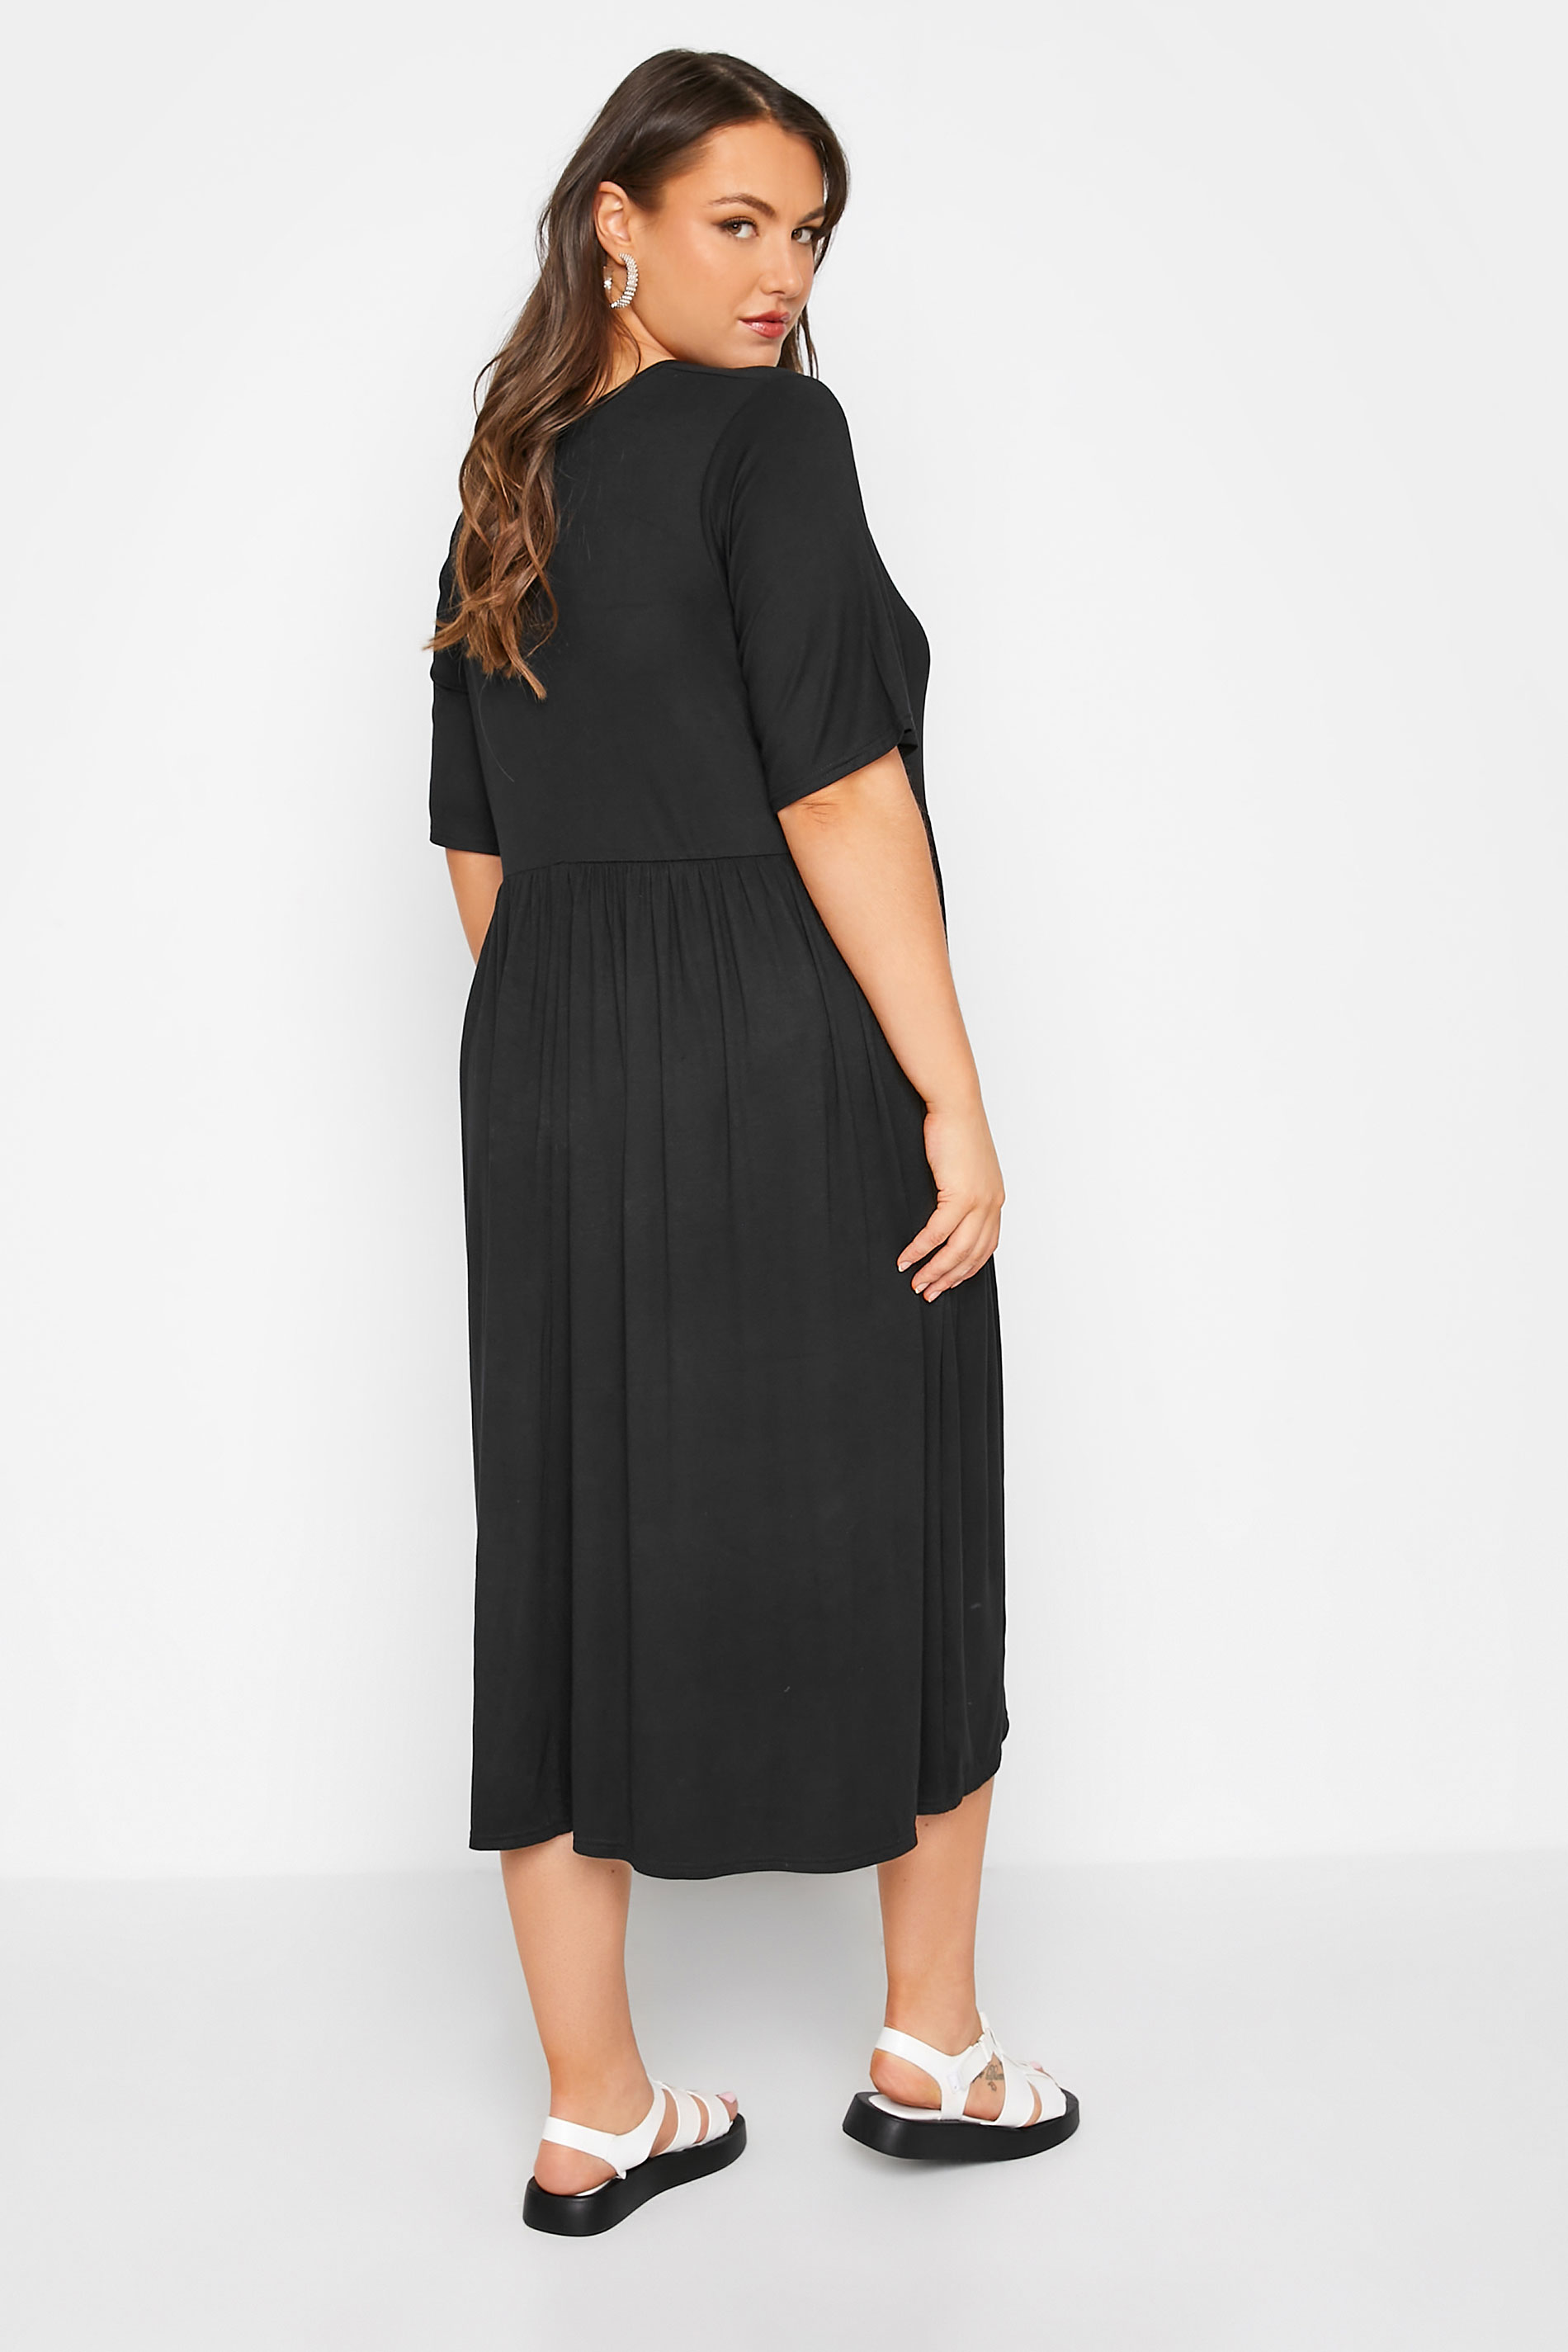 Robes Grande Taille Grande taille  Robes Smocké | LIMITED COLLECTION - Robe Midi Noire Design Uni - IY02735